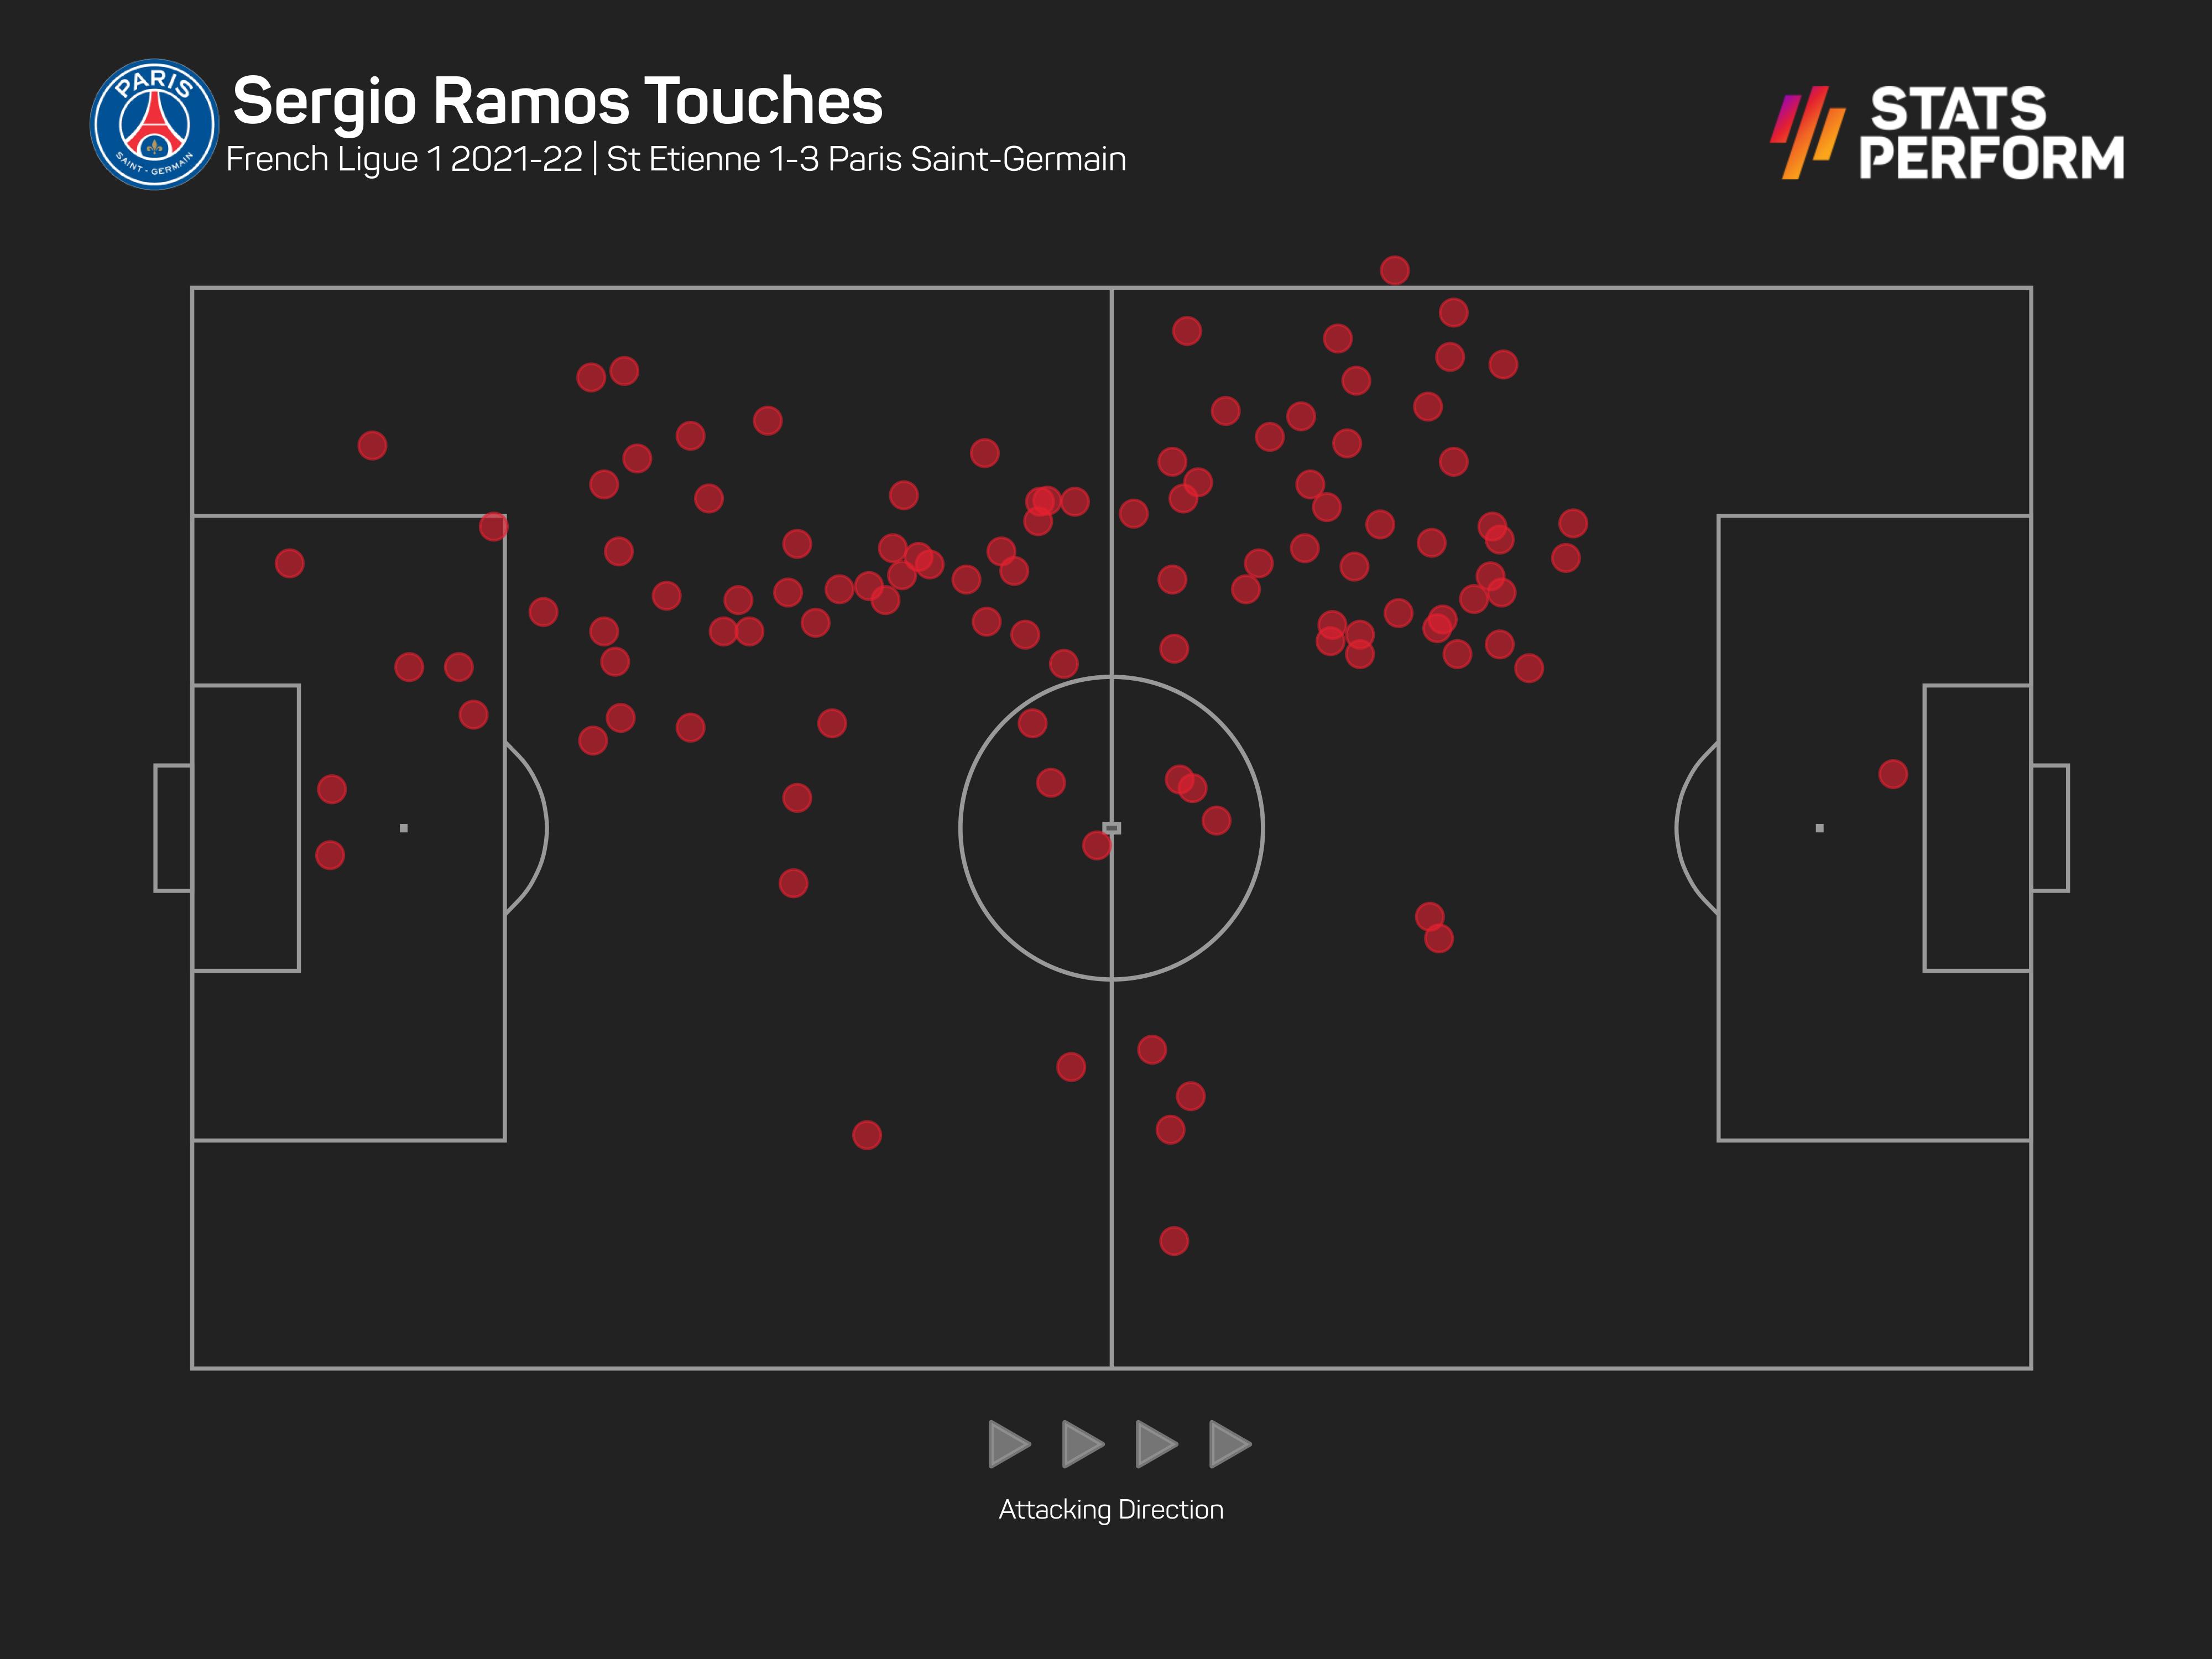 Only Angel Di Maria had more touches than Sergio Ramos